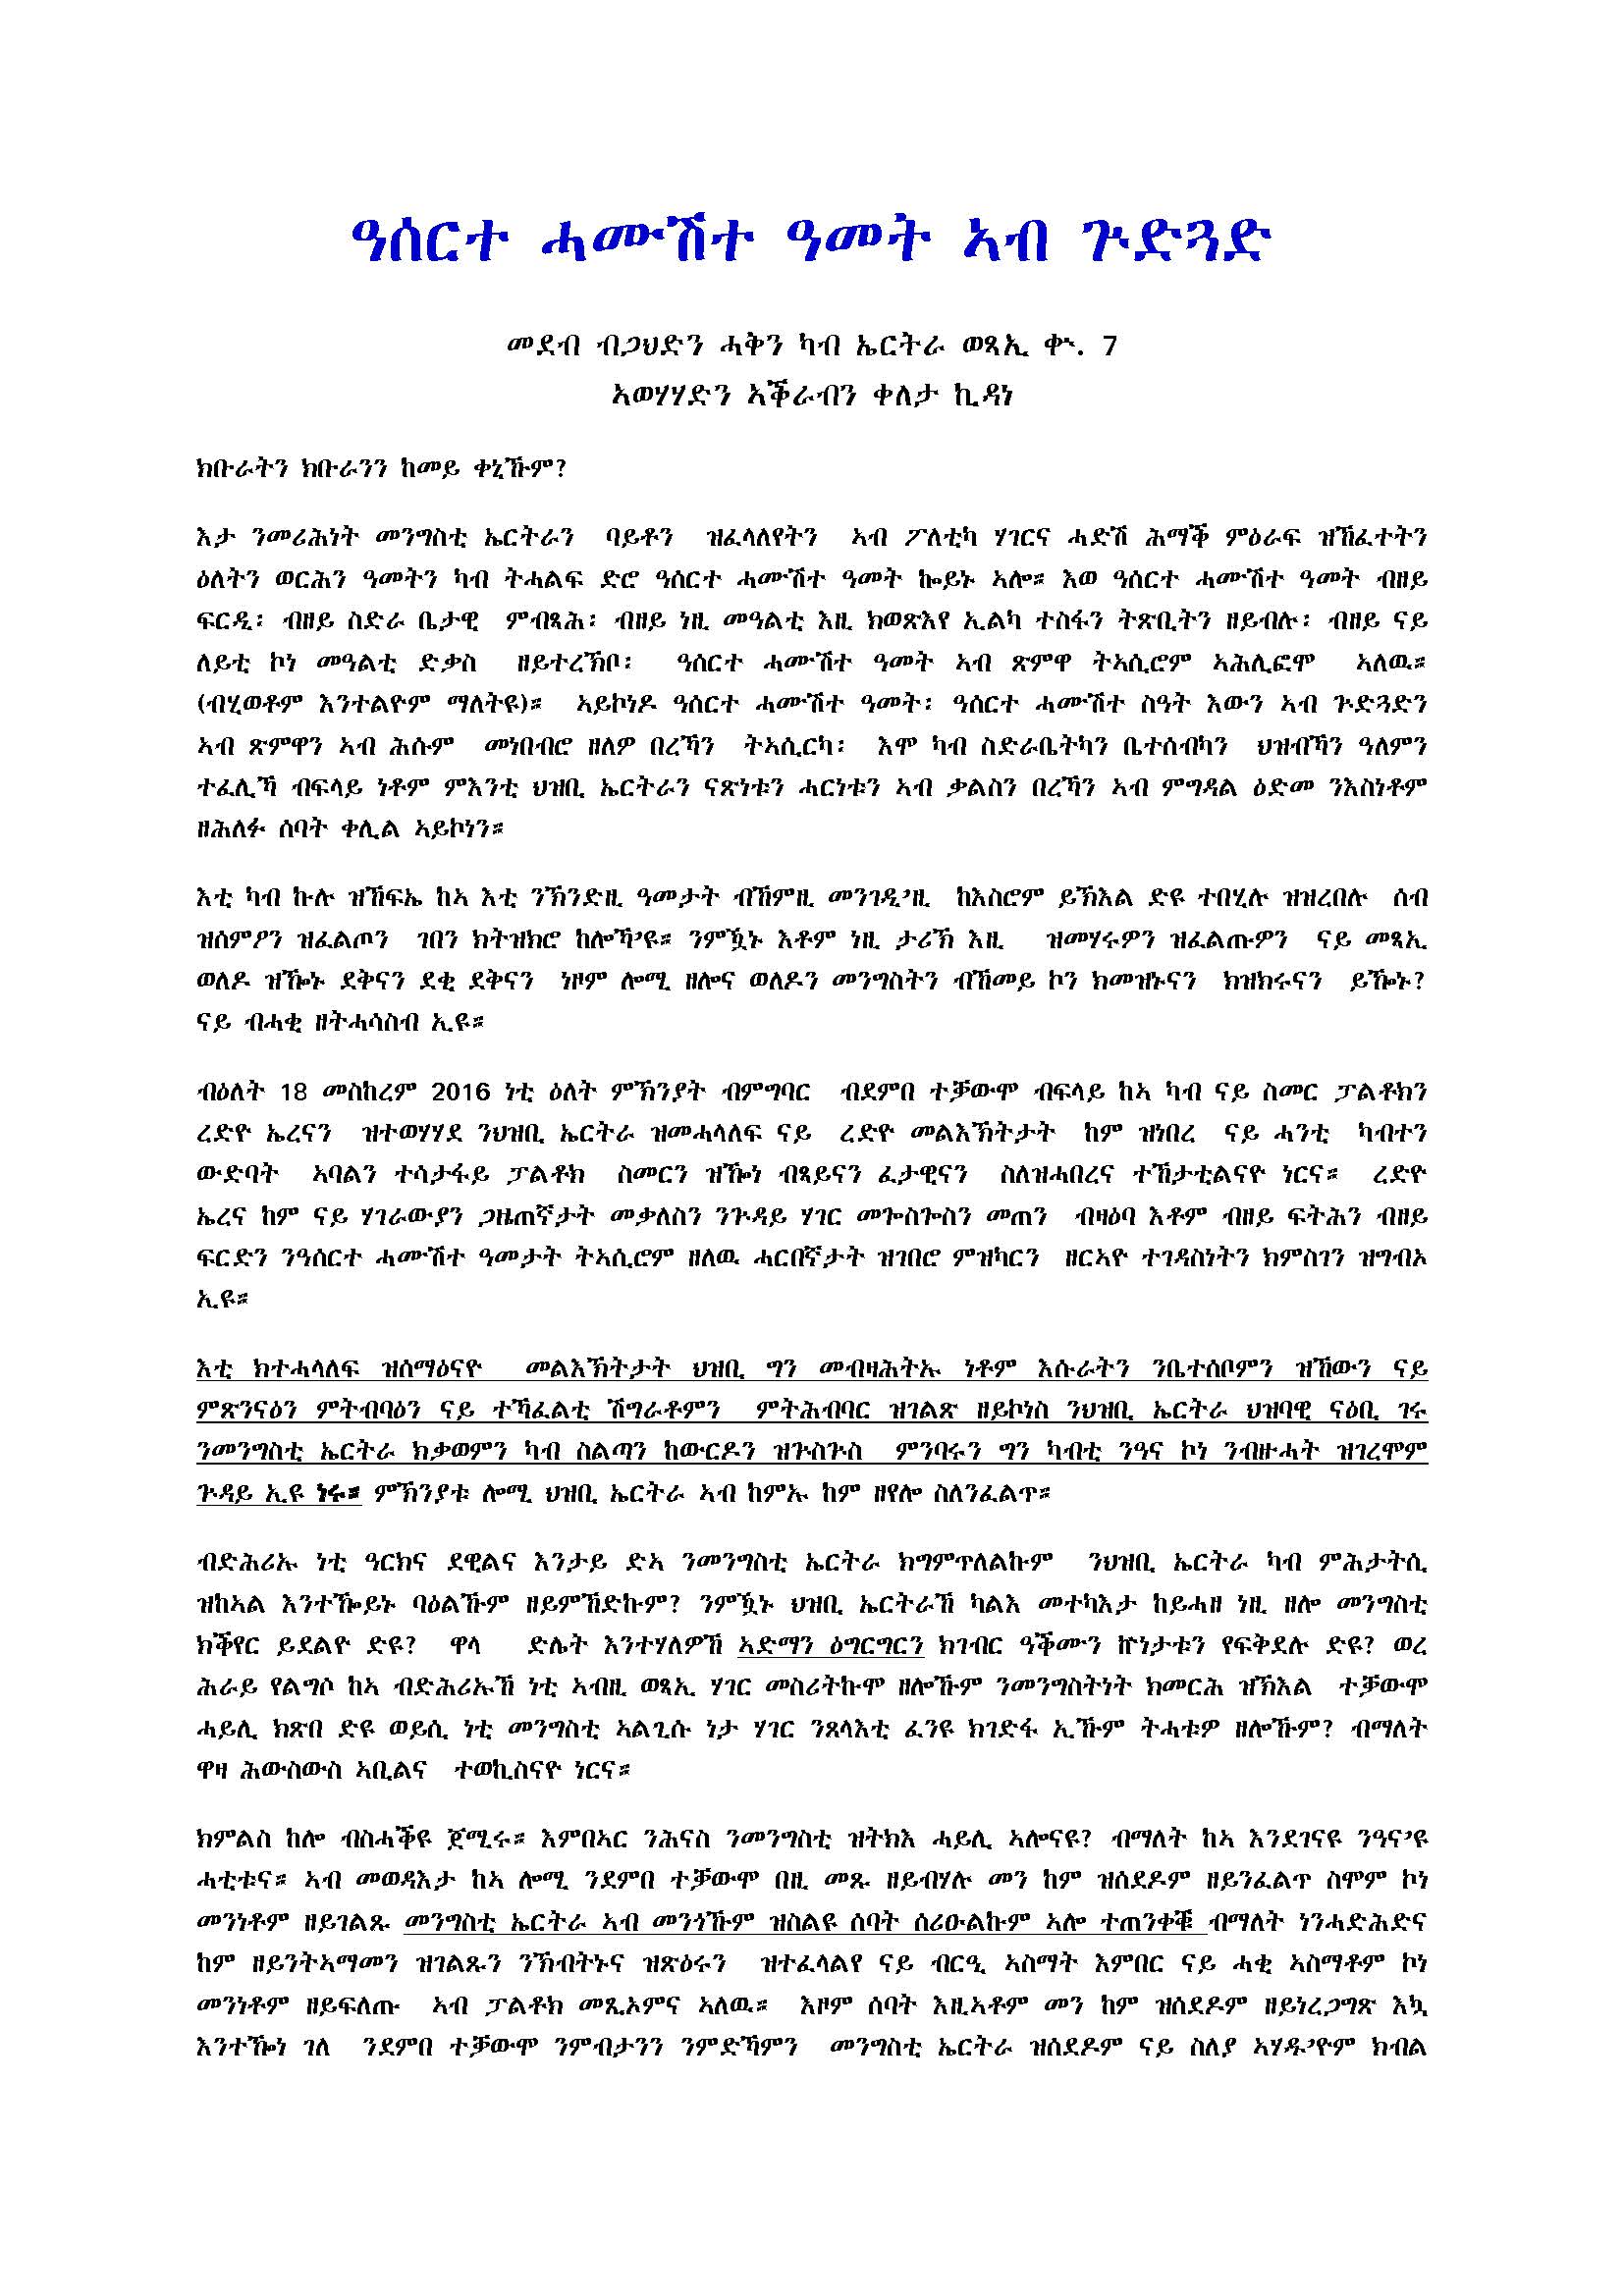 eritrean-opposition-and-demands3_page_1